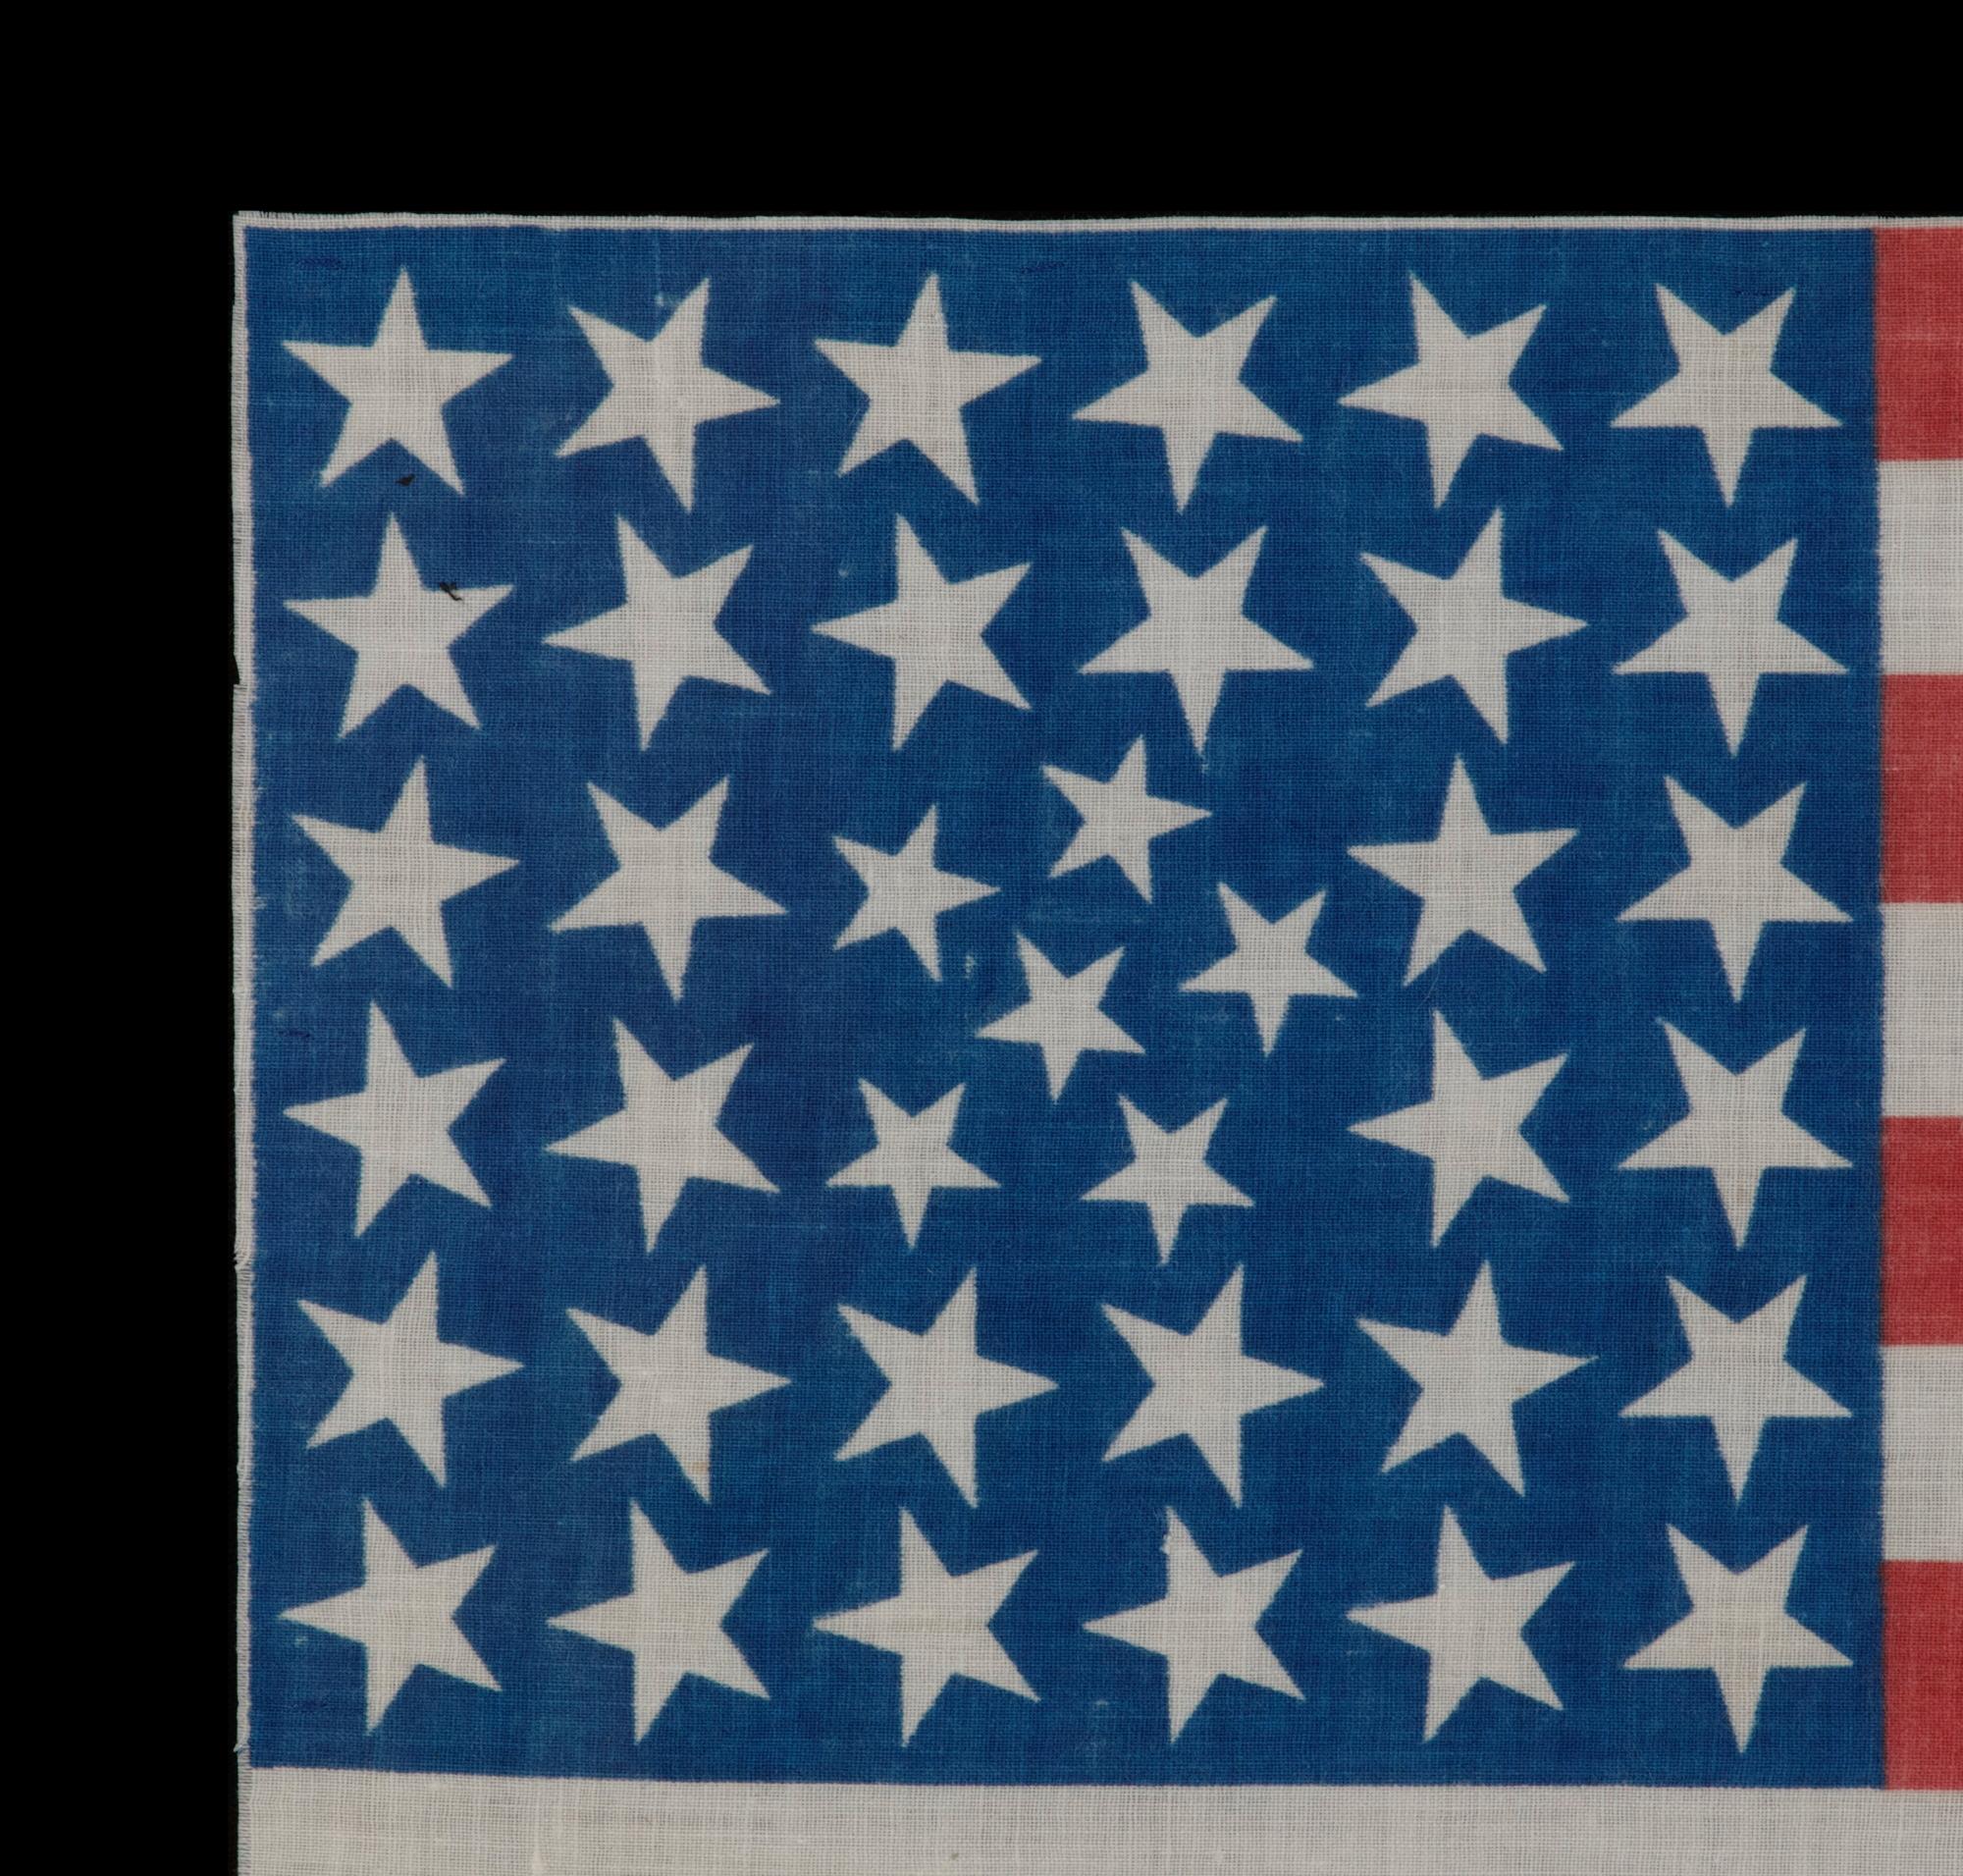 38 STARS IN AN EXTREMELY UNUSUAL CONFIGURATION THAT BEARS A CLUSTER OF 6 SMALL STARS WITHIN A LINEAL PATTERN OF LARGER STARS, 1876-1889, COLORADO STATEHOOD

38 star American national parade flag, printed on cotton. This is an extremely rare example